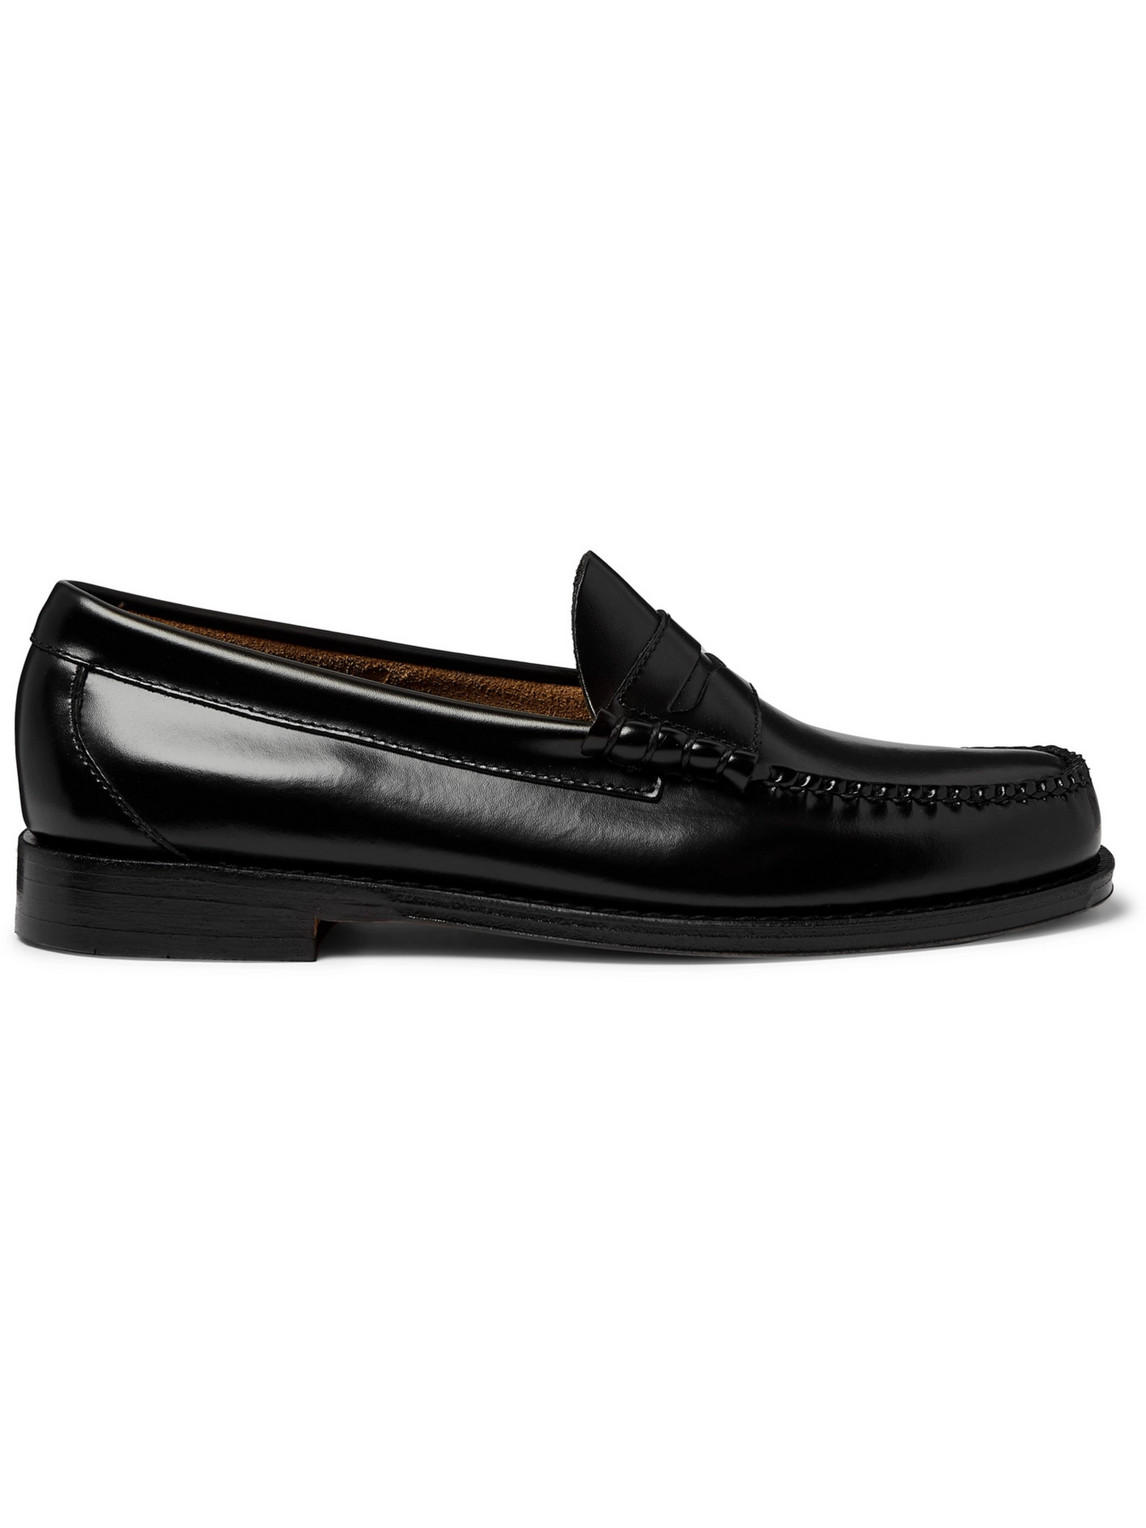 G.H. Bass & Co. - Weejuns Heritage Larson Leather Penny Loafers - Men - Black - UK 5 von G.H. Bass & Co.